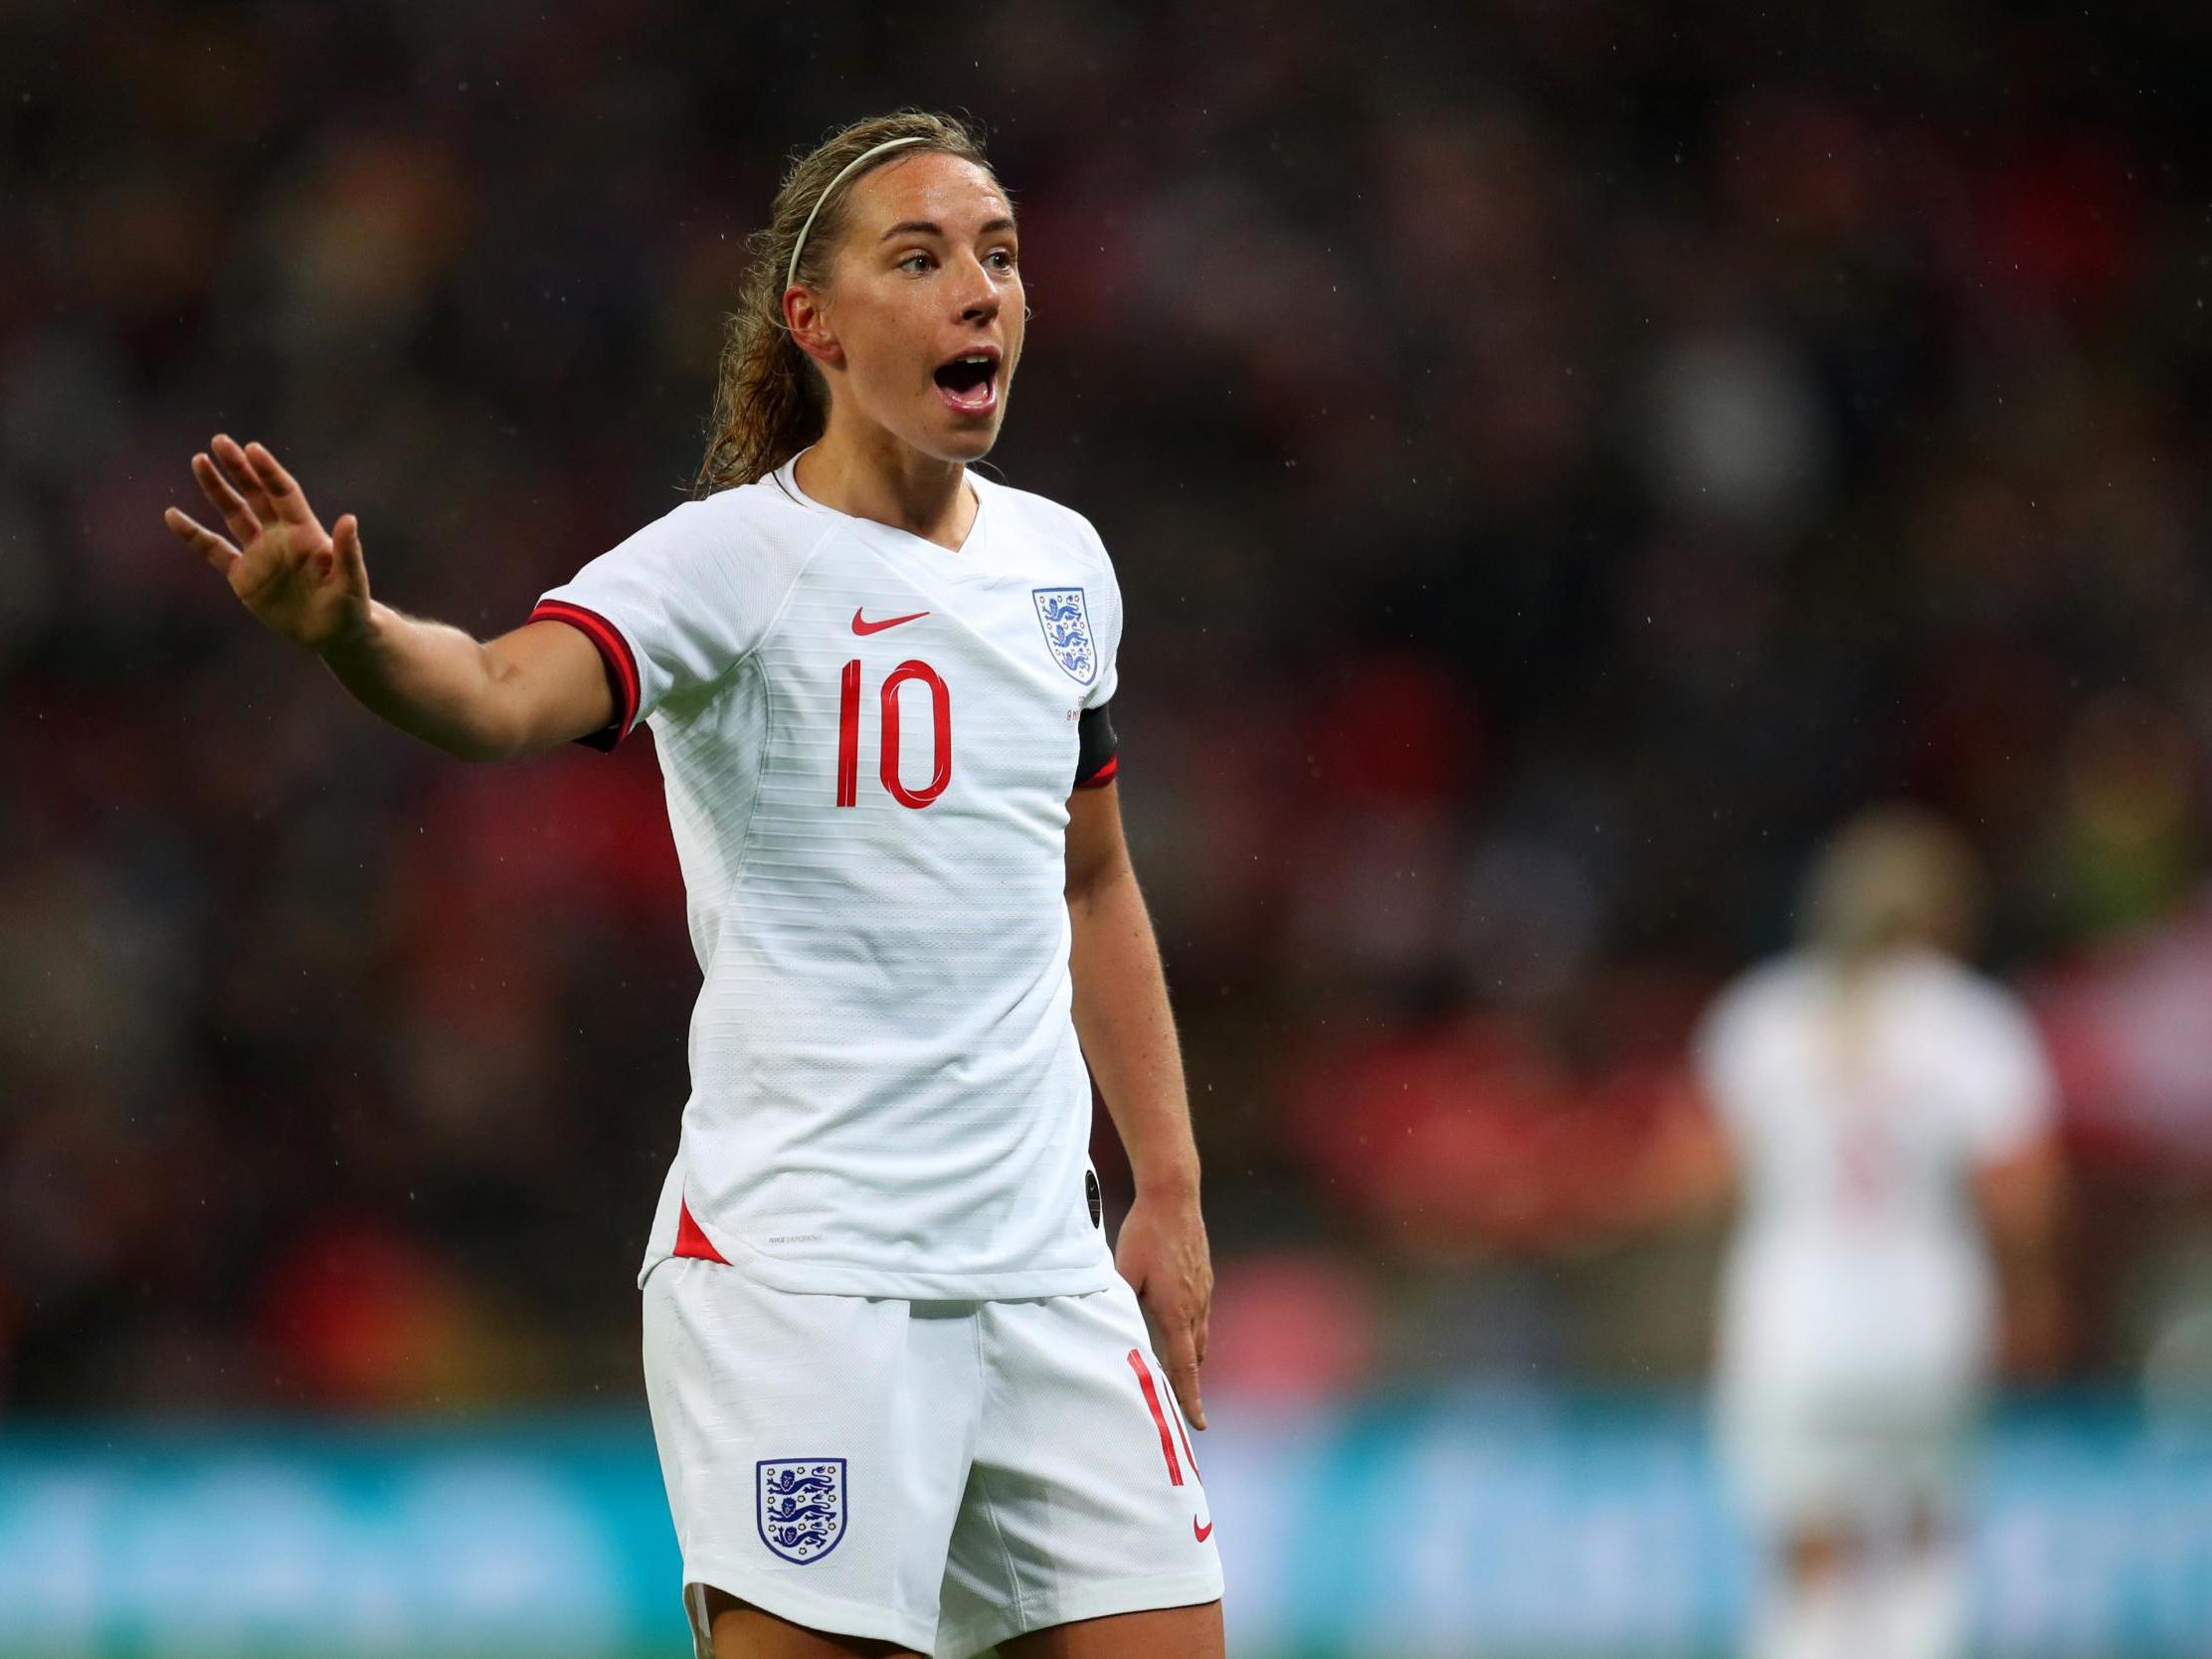 Jordan Nobbs has set her sights on the Olympics with England